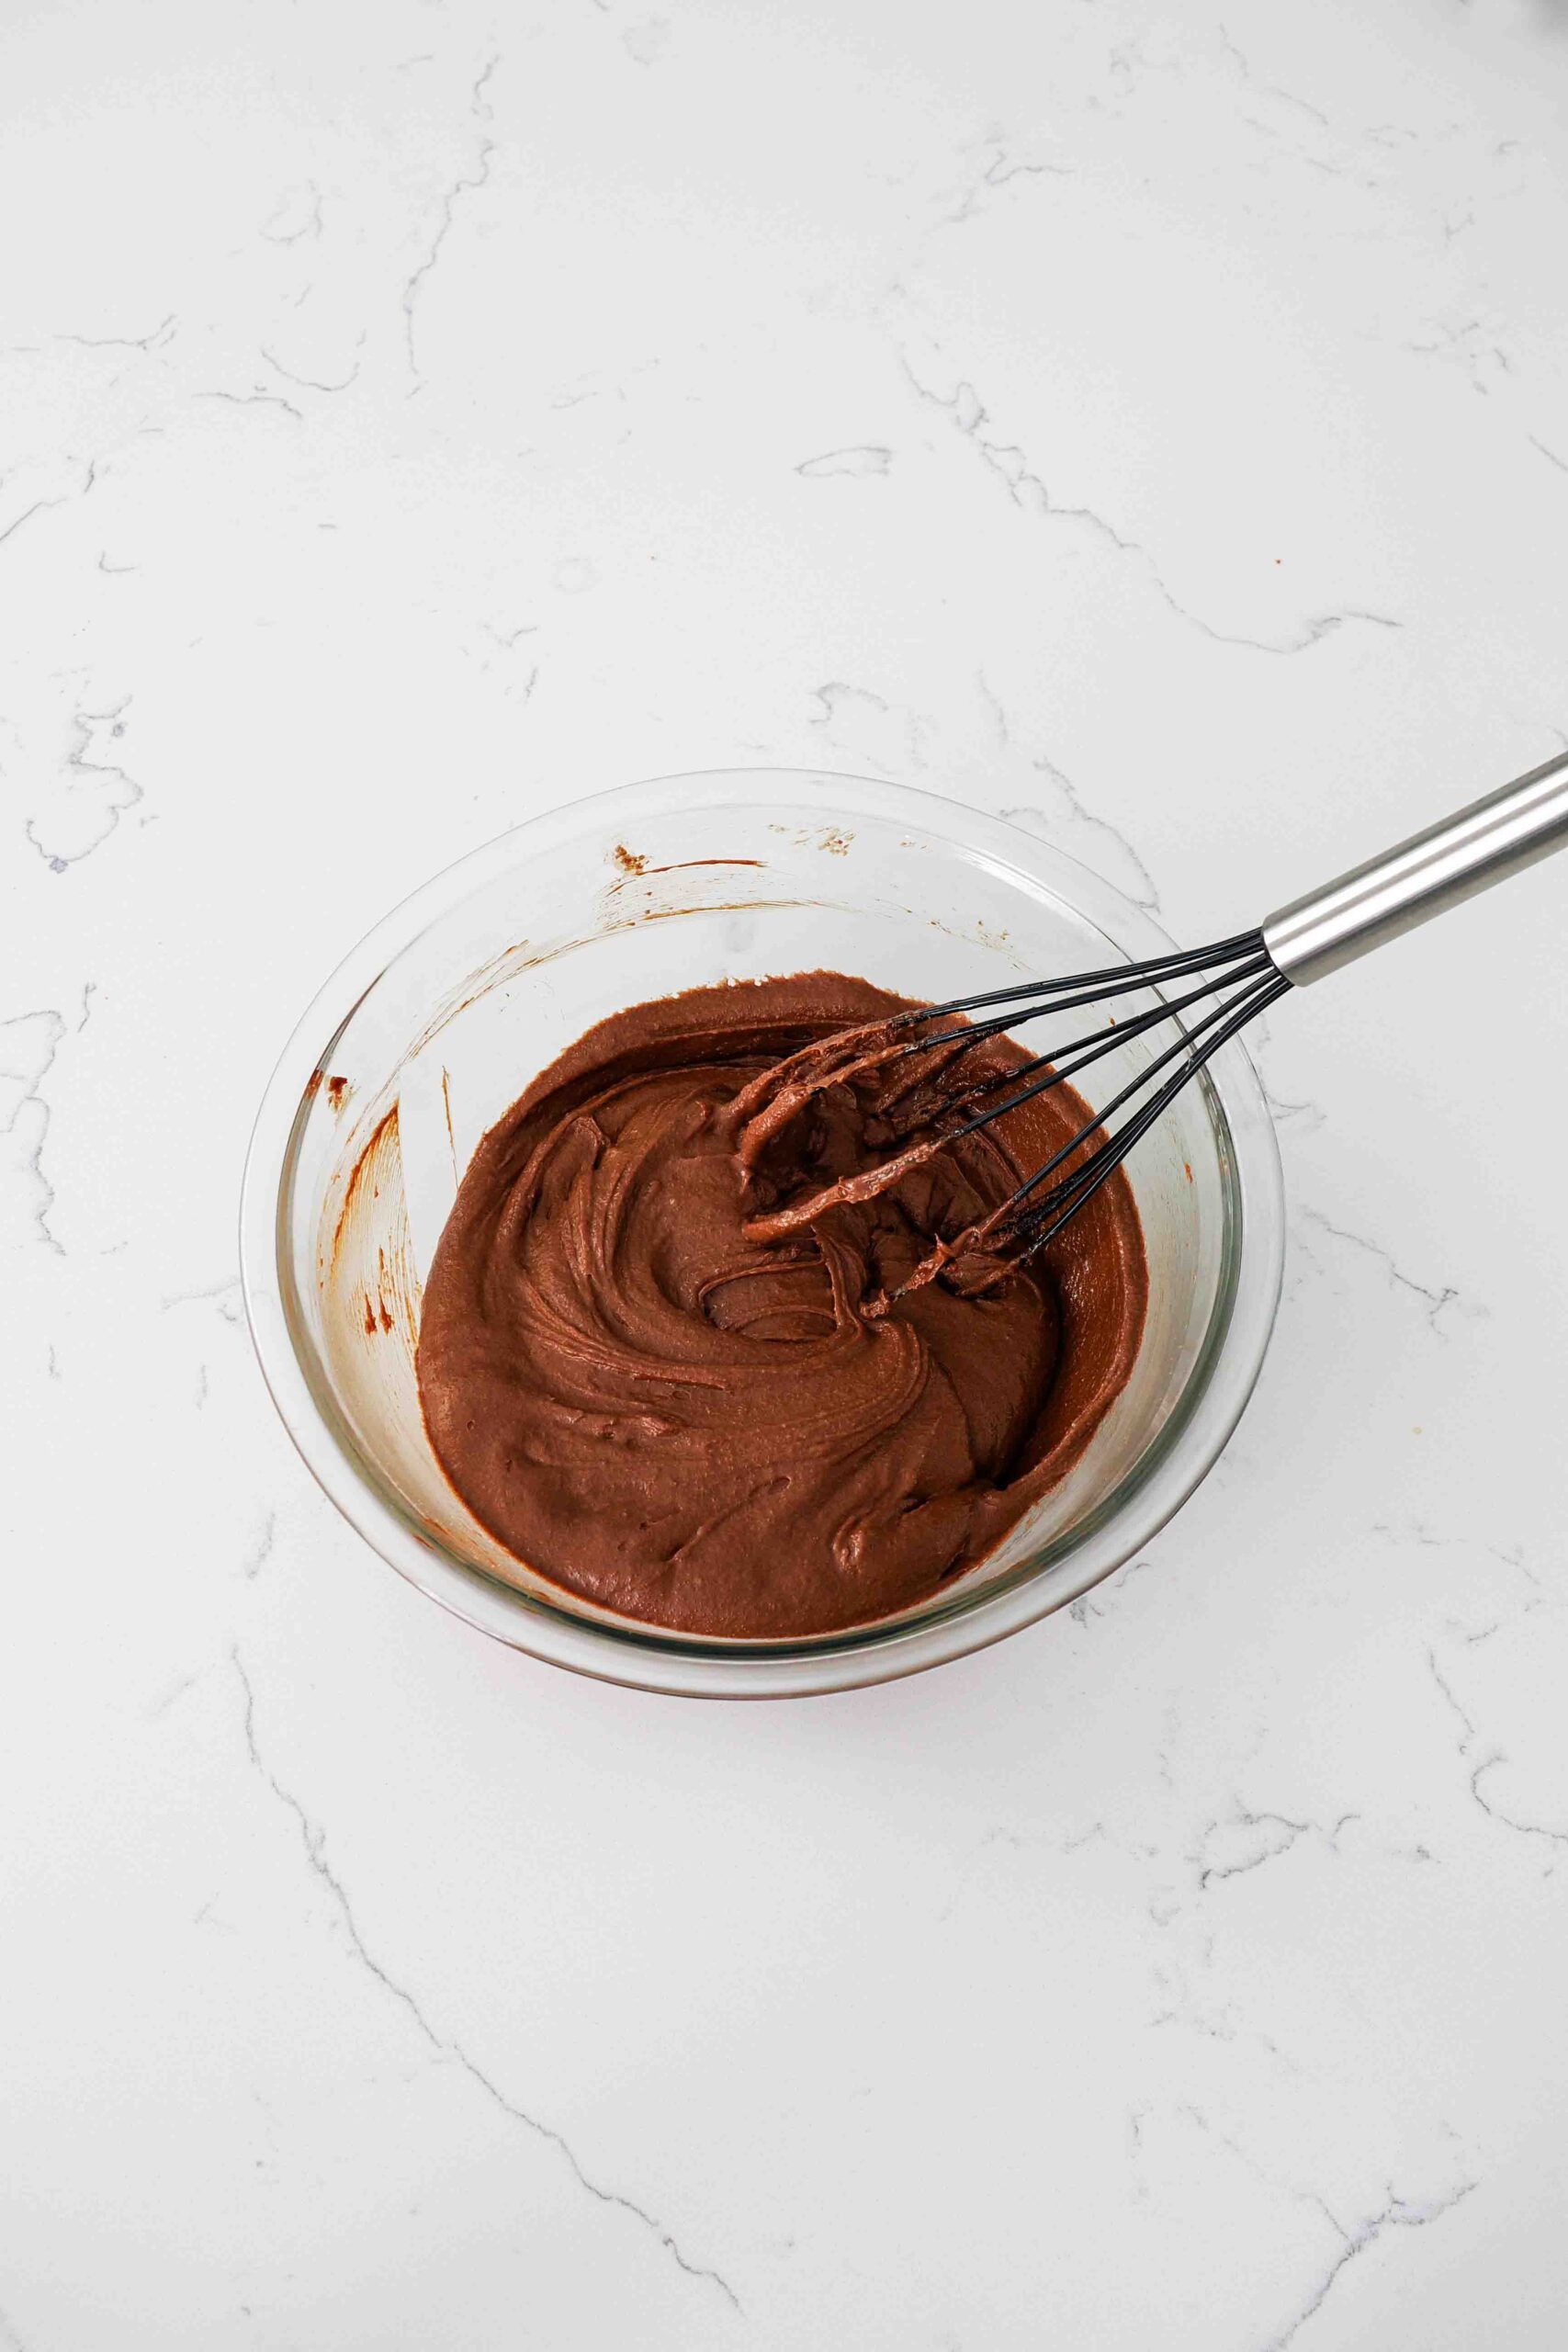 A whisk in a very thick chocolate batter.